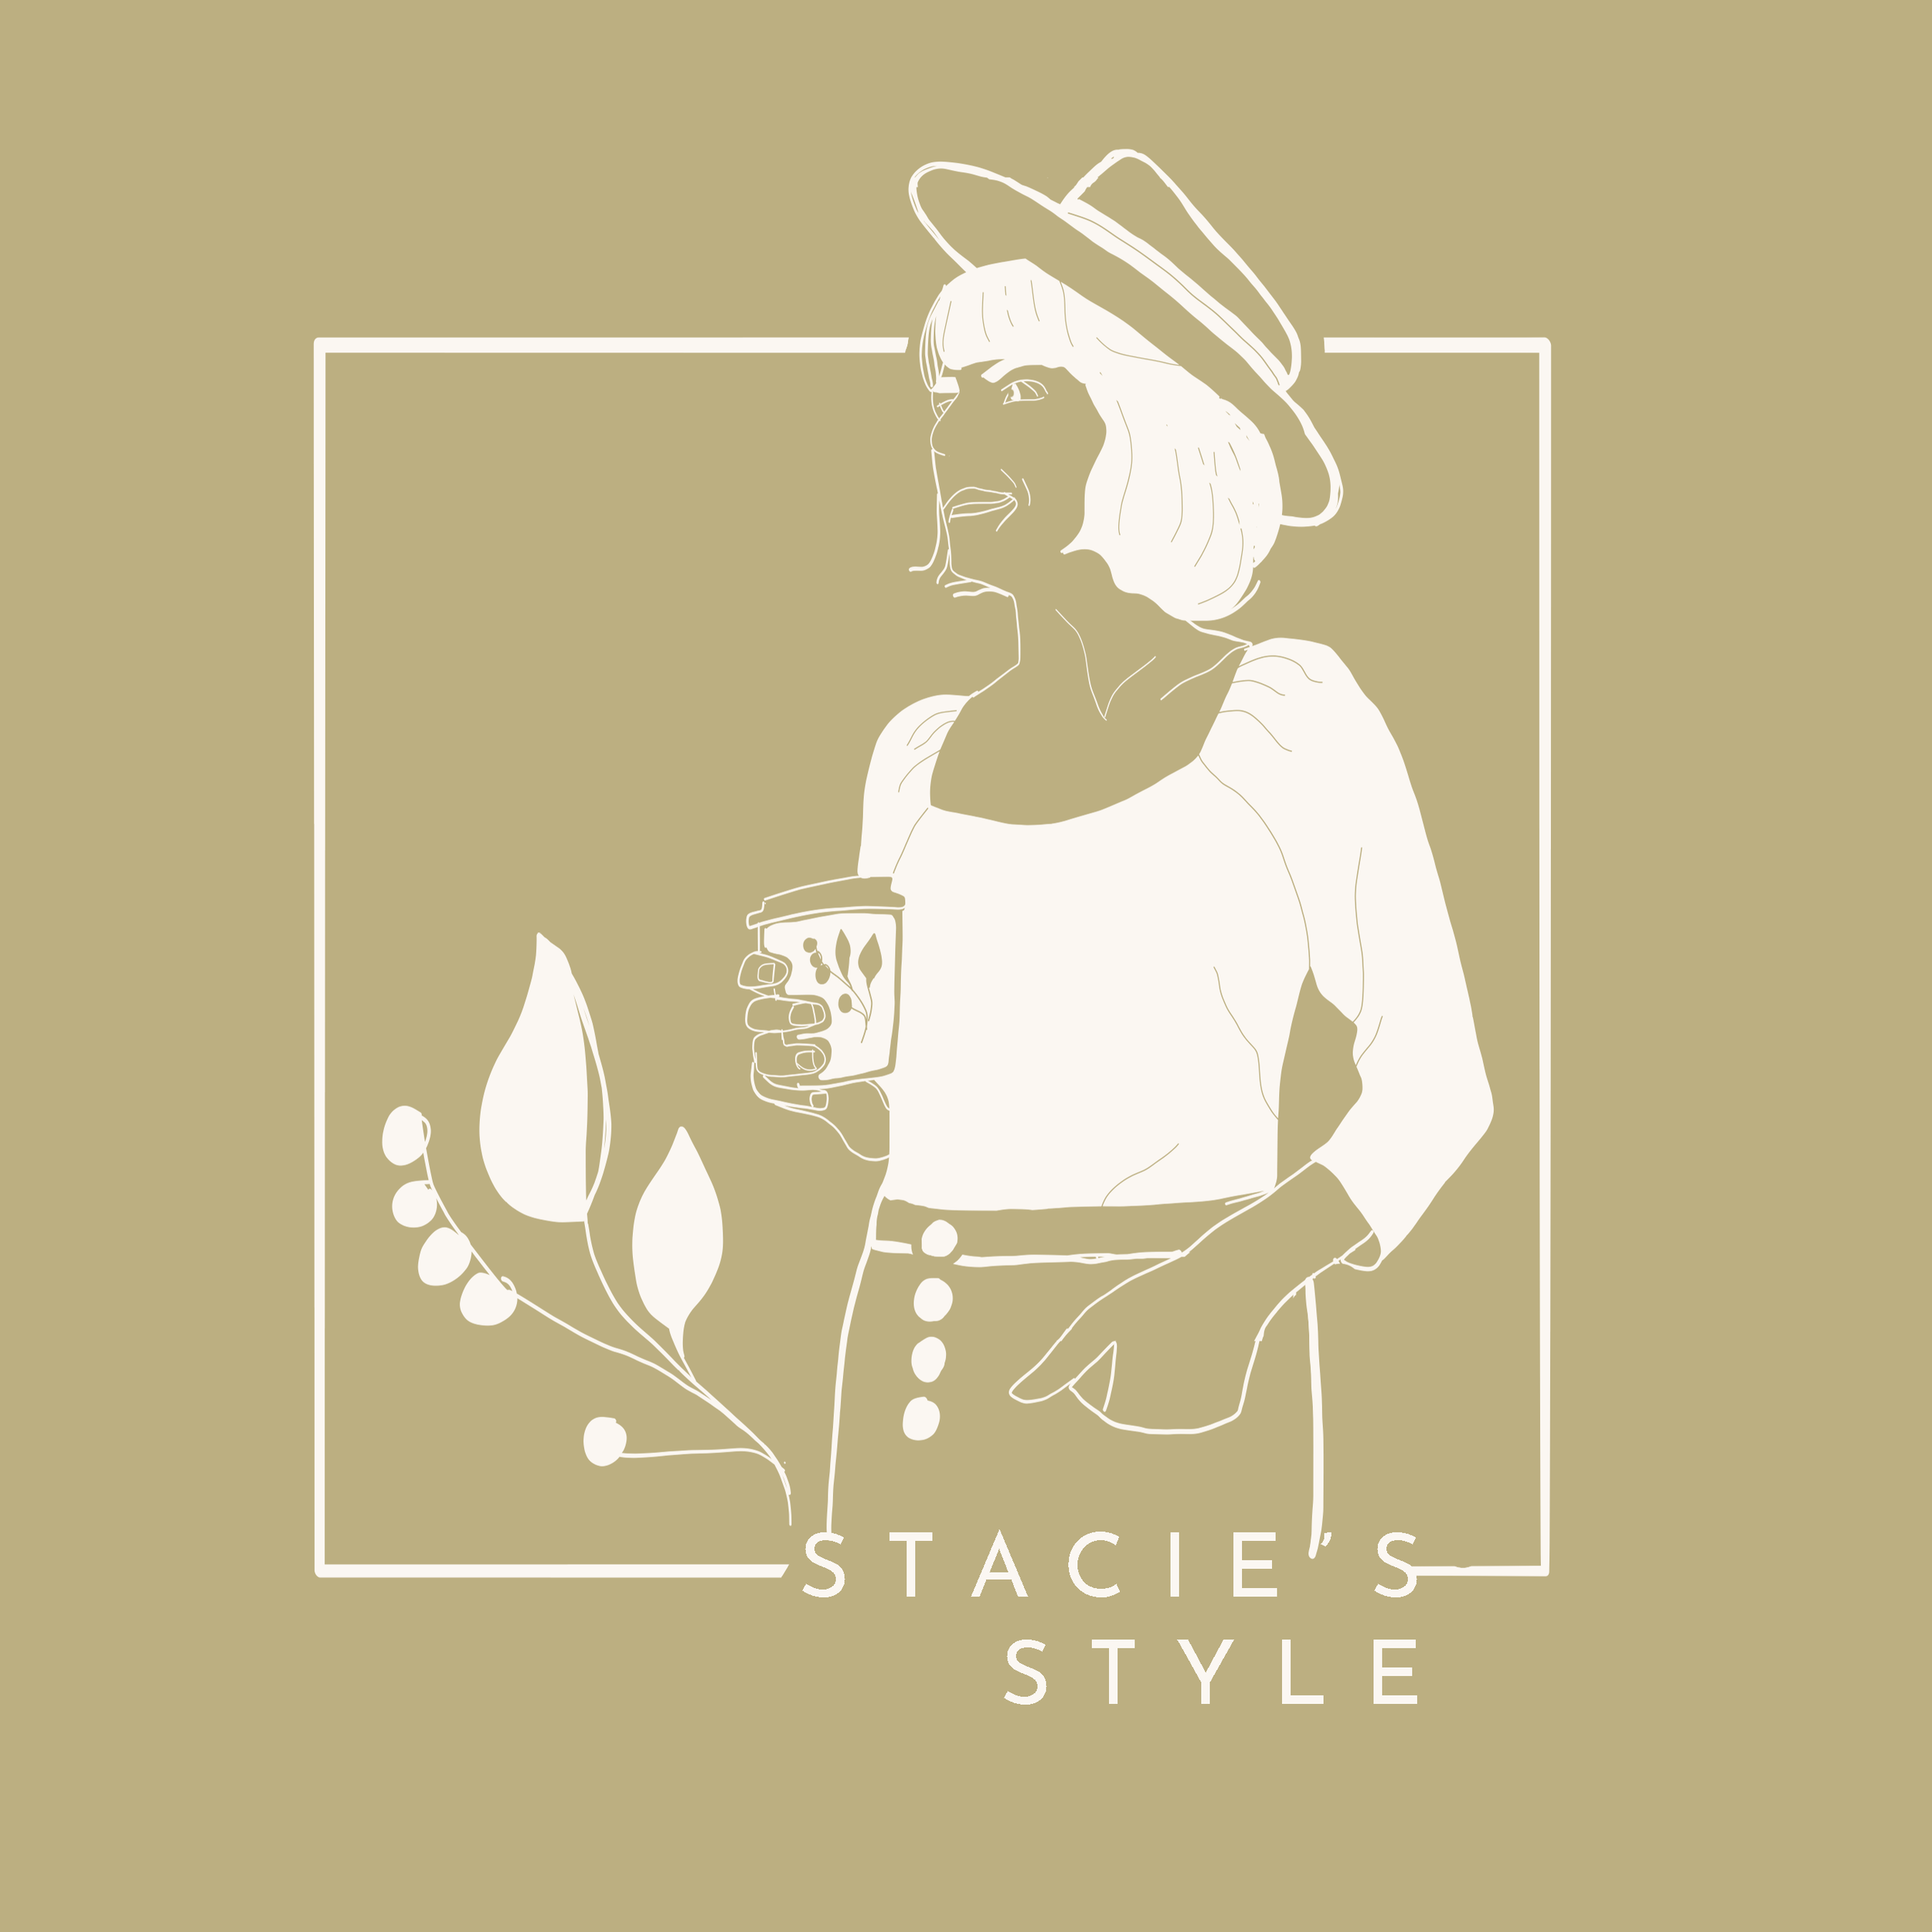 Stacie Stine is a woman who wears many hats and is passionate about wearing stylish non-fast fashion clothing. 